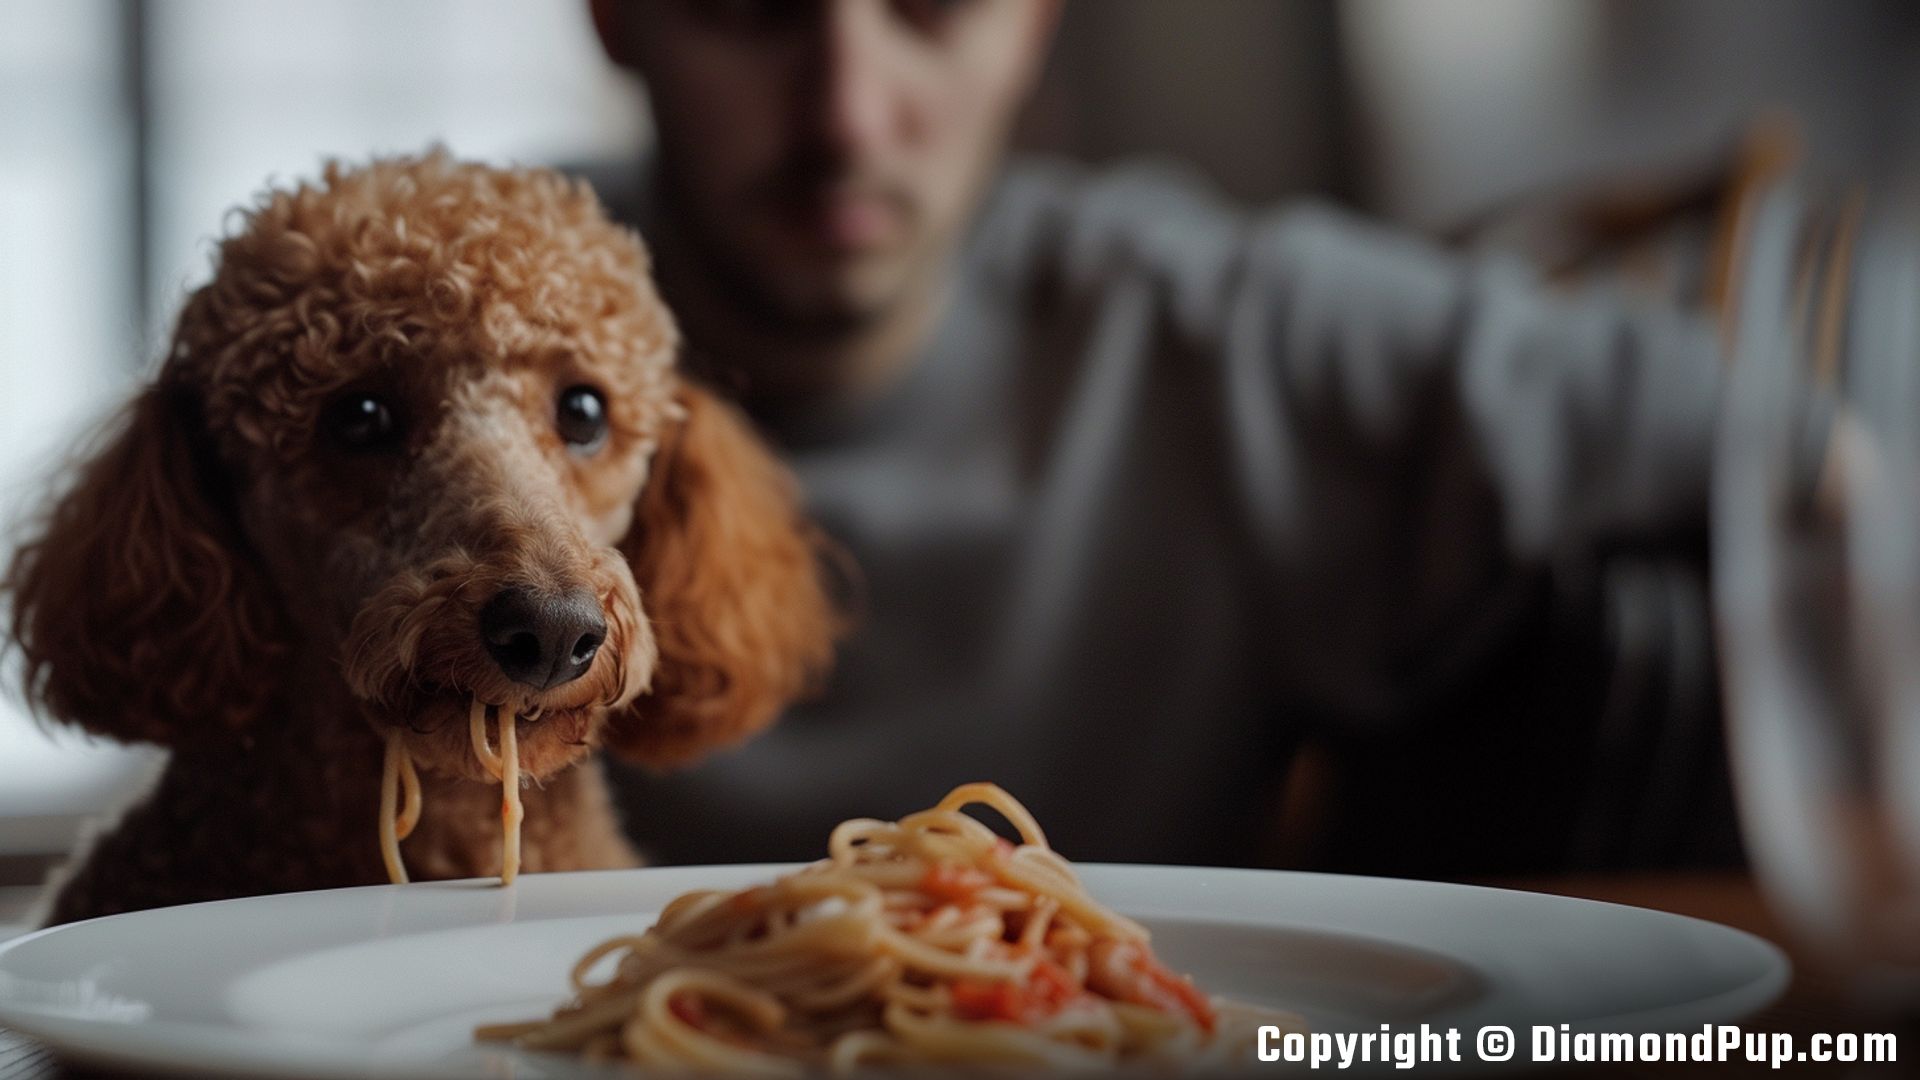 Photograph of a Playful Poodle Snacking on Pasta